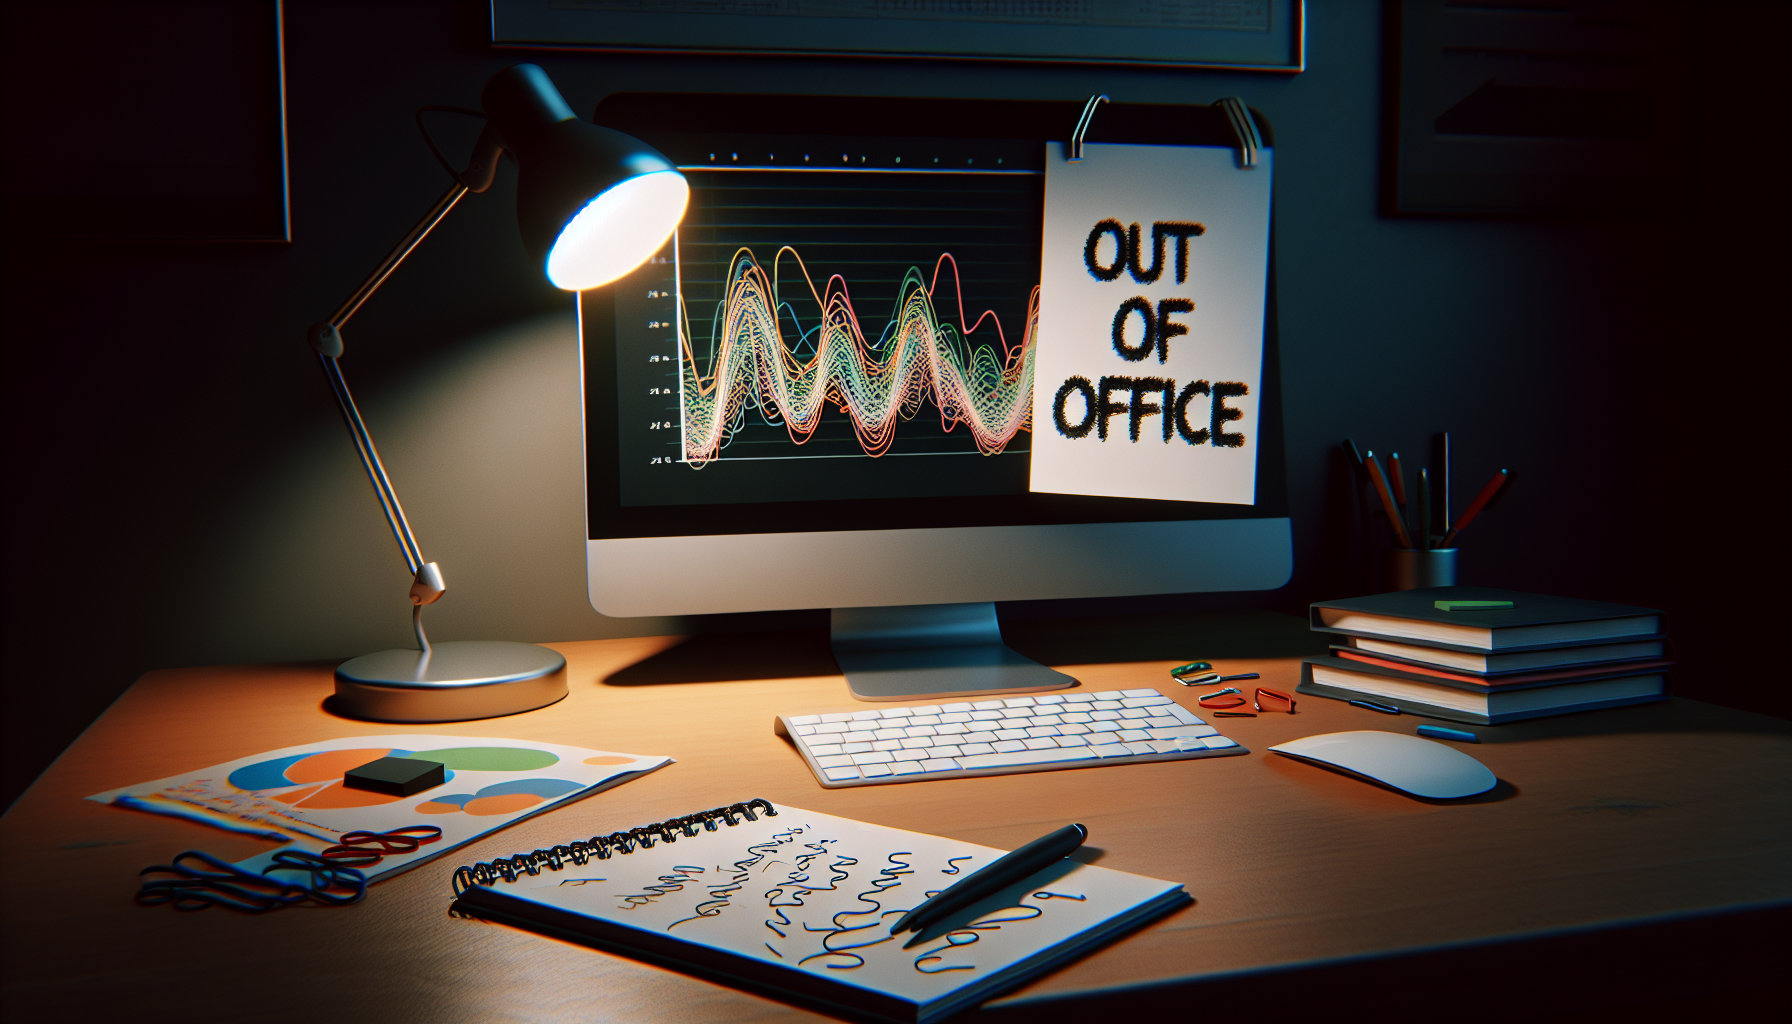 Desk with 'Out of Office' sign and computer